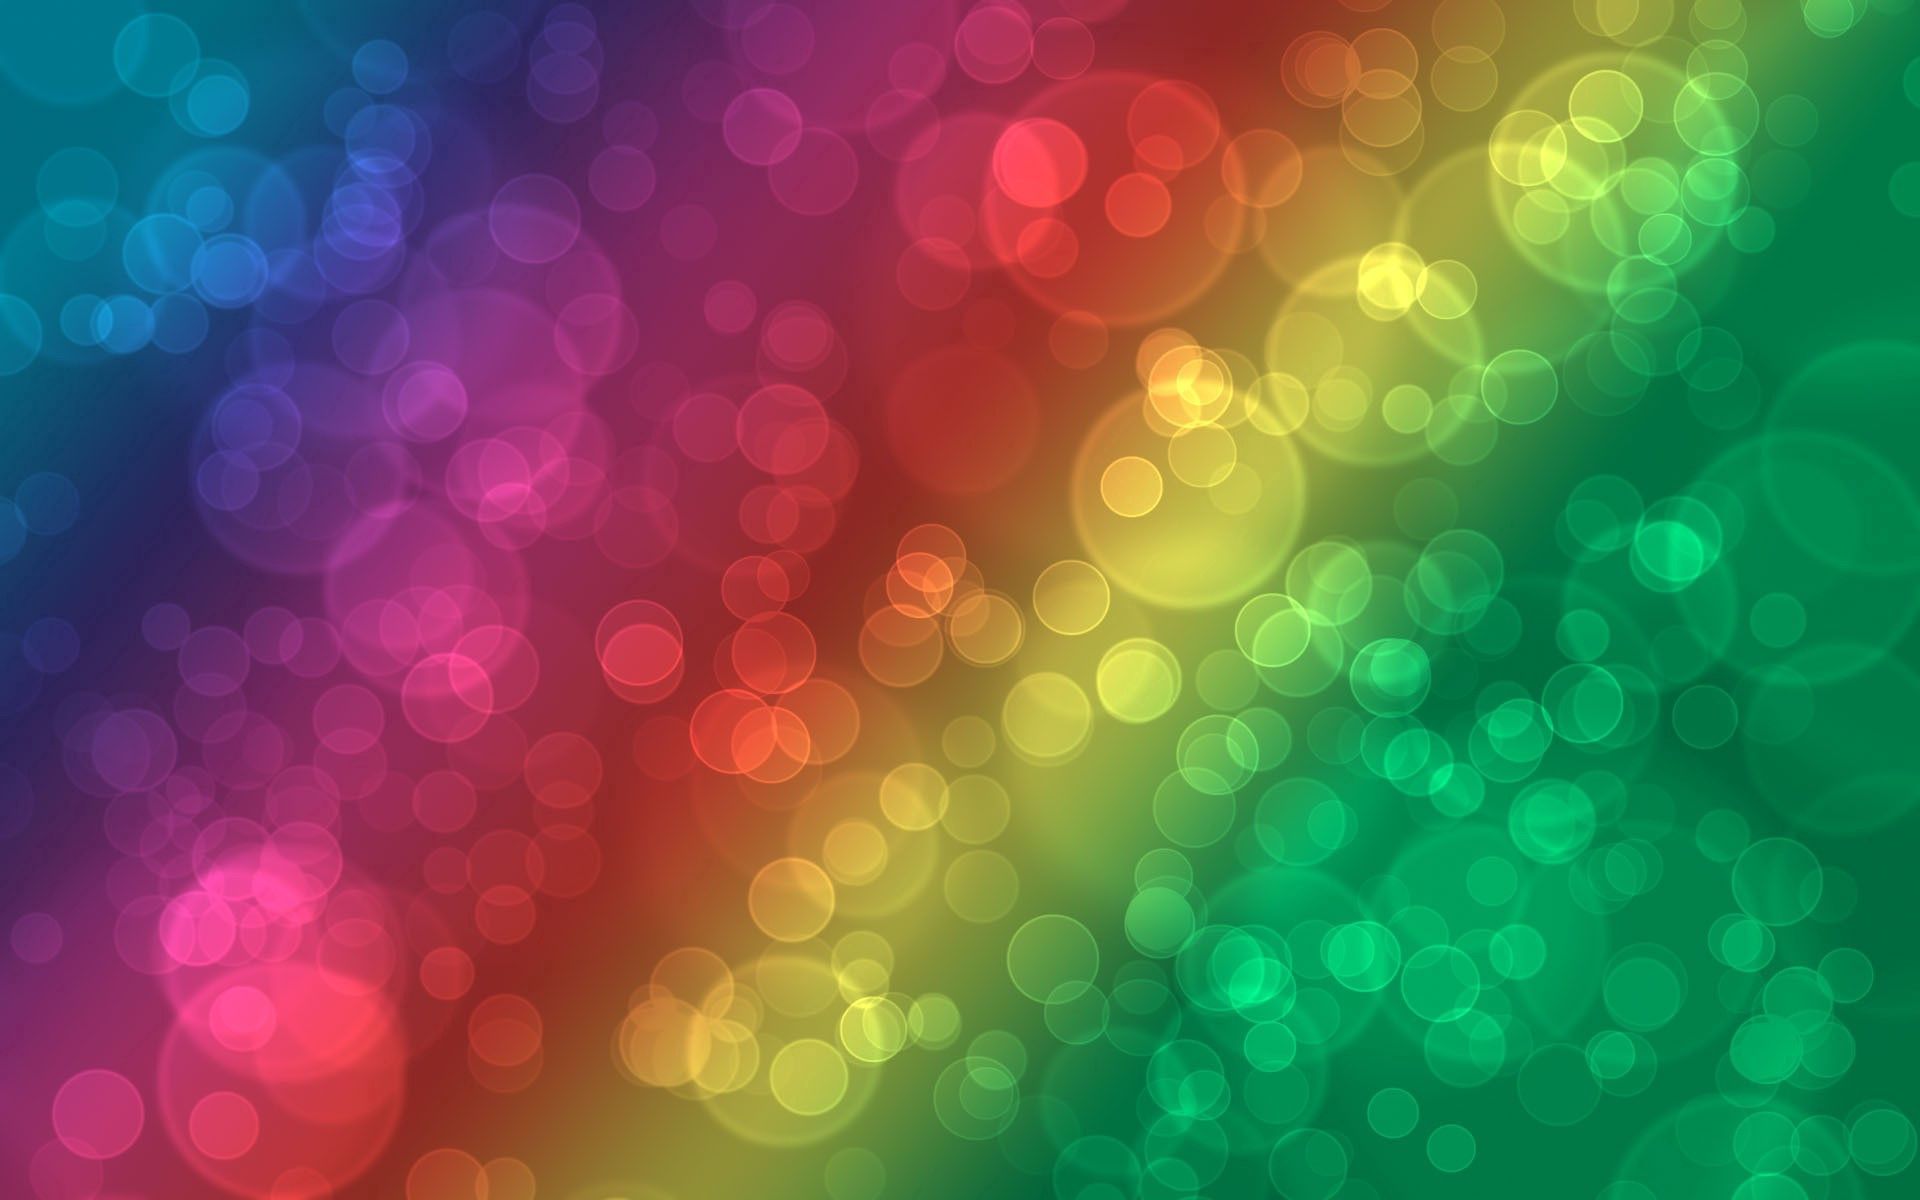 Wallpaper Full HD abstract, background, glare, circles, multicolored, motley